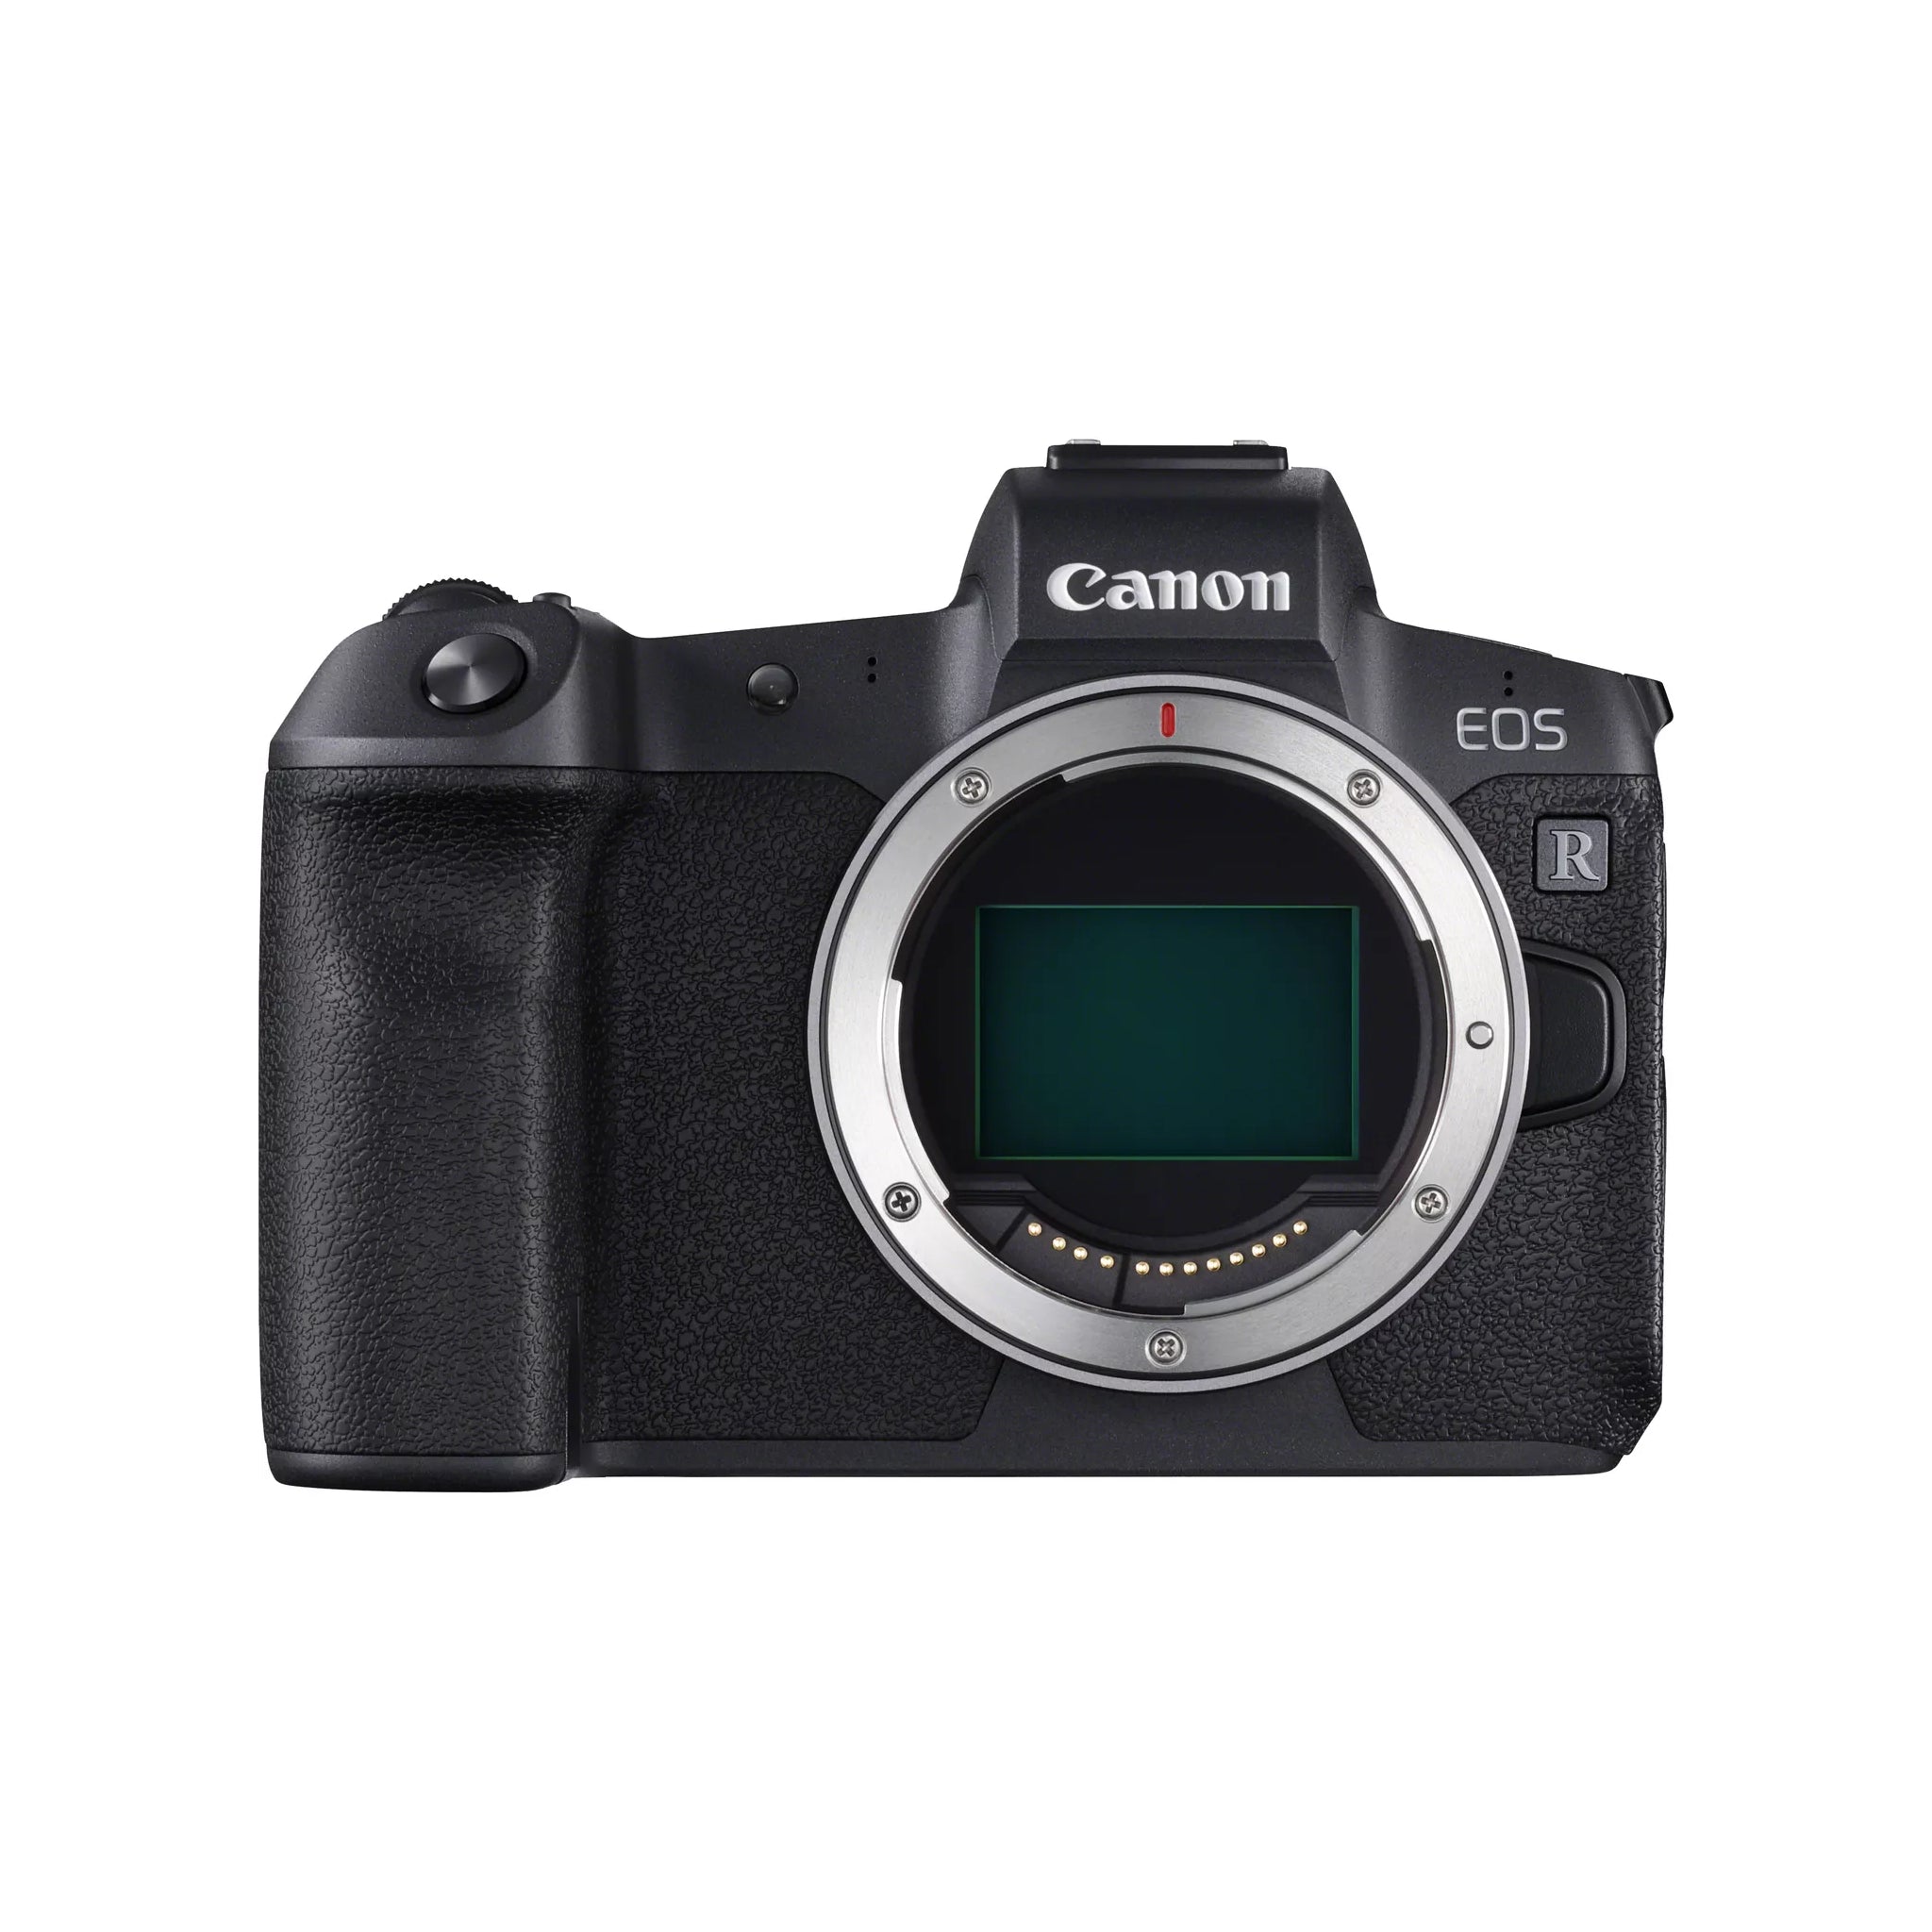 Canon Eos R Mirrorless Dslr Camera (Body Only)